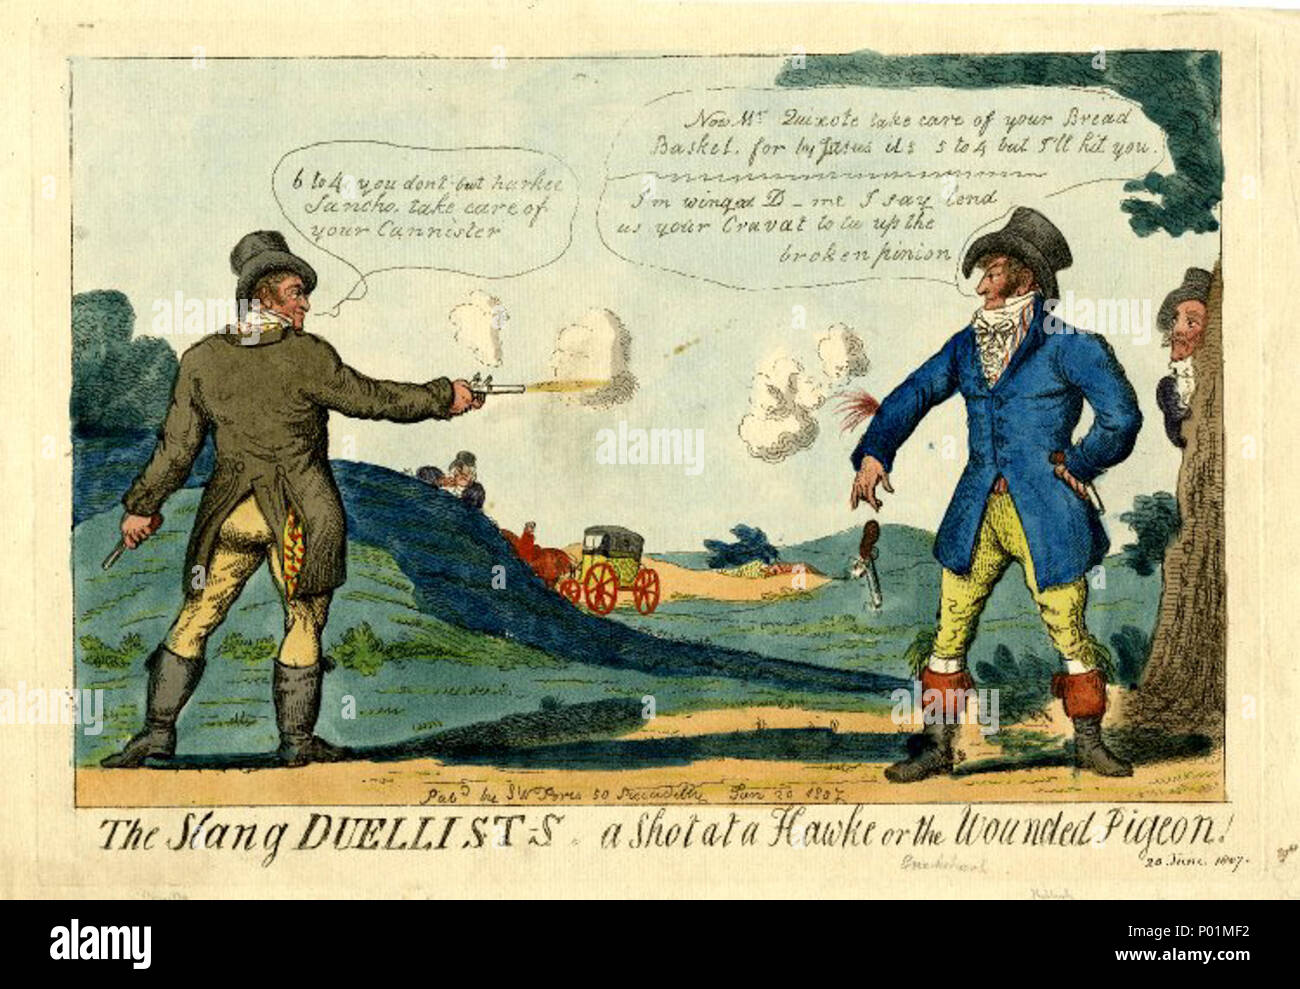 . English: The slang duellist-s a shot at a hawke or the wounded pigeon! The duel between Mr Hawke and Mr (Harry) Mellish. 1807. Caricature by Isaac Cruikshank (1756-1811). Artist dead for over 200 years.  . 19 March 2013, 19:44:39.   Isaac Cruikshank  (1764–1811)     Description Scottish painter and caricaturist  Date of birth/death 1756 April 1811  Location of birth/death Edinburgh London  Work location London  Authority control  : Q3154738 VIAF:?107045019 ISNI:?0000 0000 8012 2606 ULAN:?500005958 LCCN:?n94004259 GND:?119201623 WorldCat 24 The slang duellist-s a shot at a hawke or the wounde Stock Photo